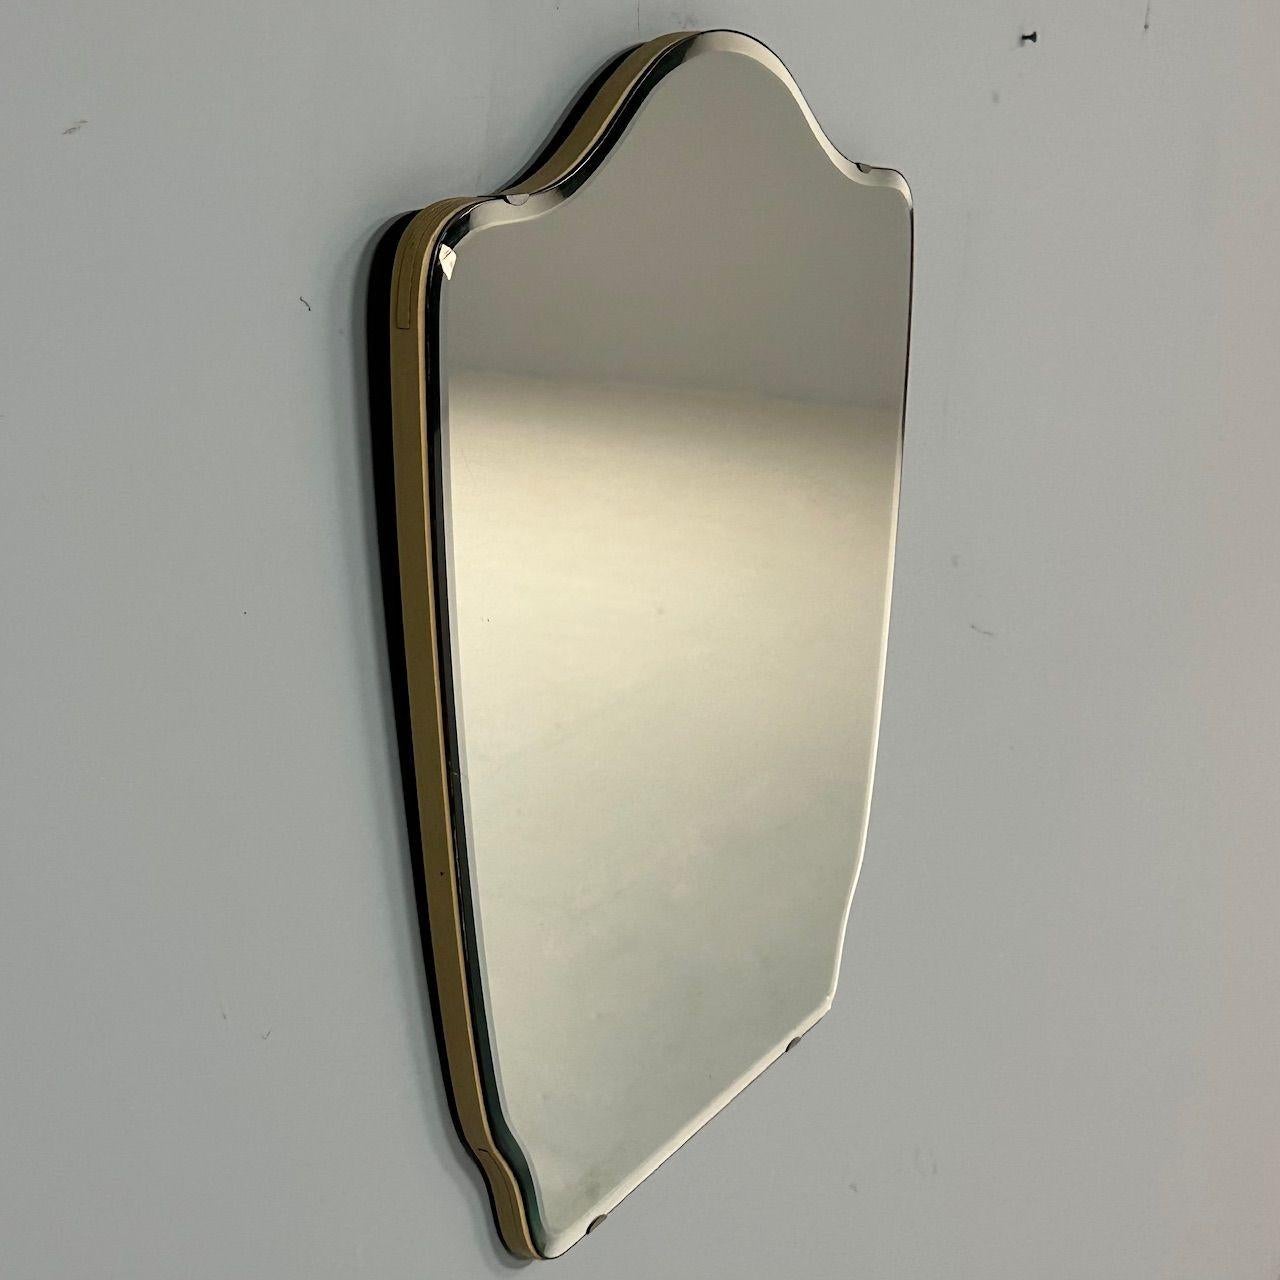 Swedish Mid-Century Modern, Small Wall Mirror, Shield Form, Sweden, 1970s

Mid-century modern mirror designed and produced in Sweden in the later half of the 20th century. This shield form mirror has a beveled edge, wooden back, and four brass